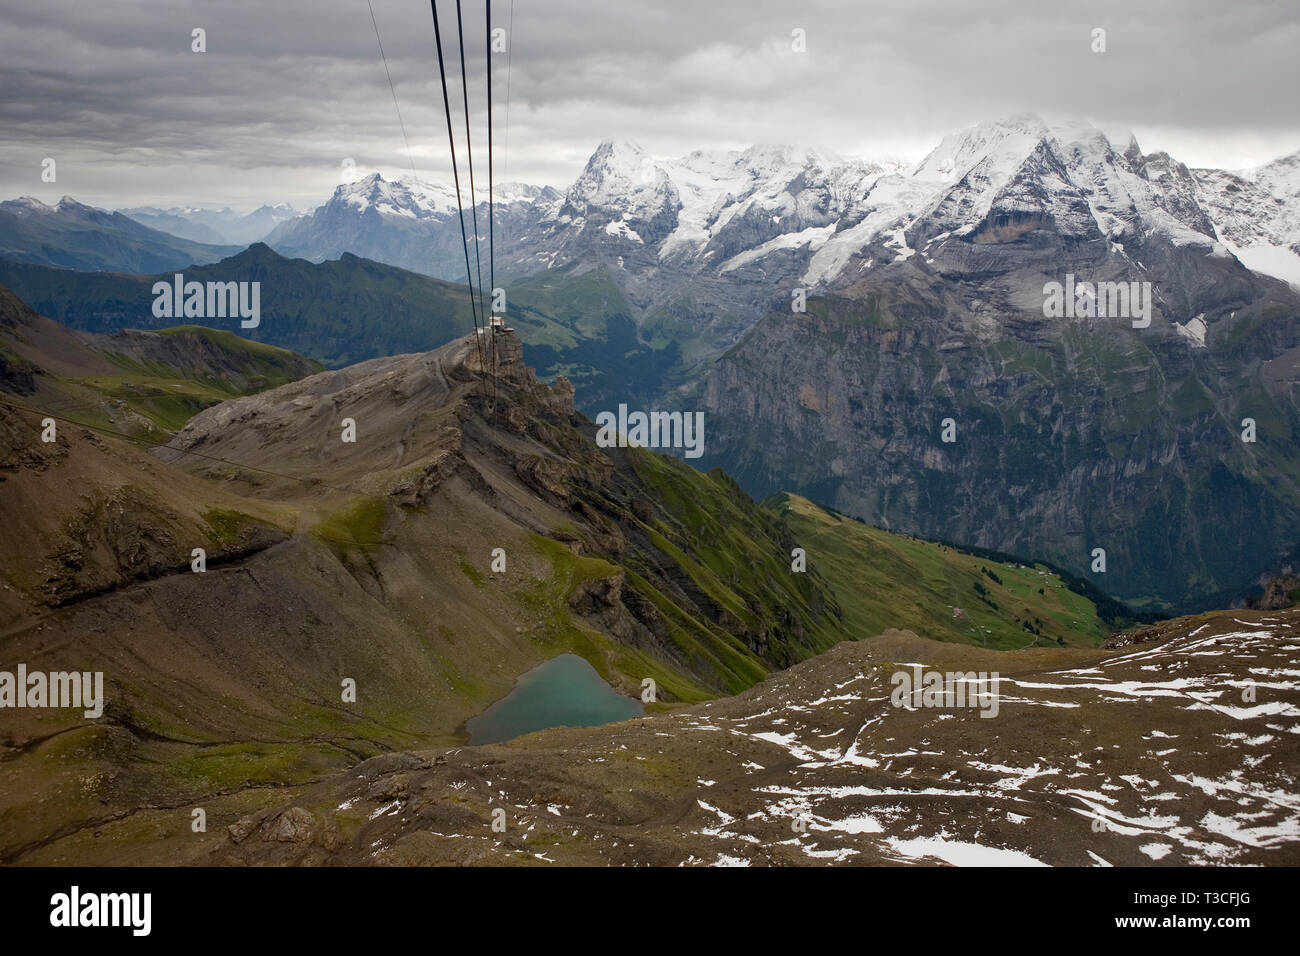 The Birg cablecar station perched above a cliff with the Jungfrau Massif and the Lauterbrunnen valley beyond and the Grauseeli, a small mountain tarn, Stock Photo